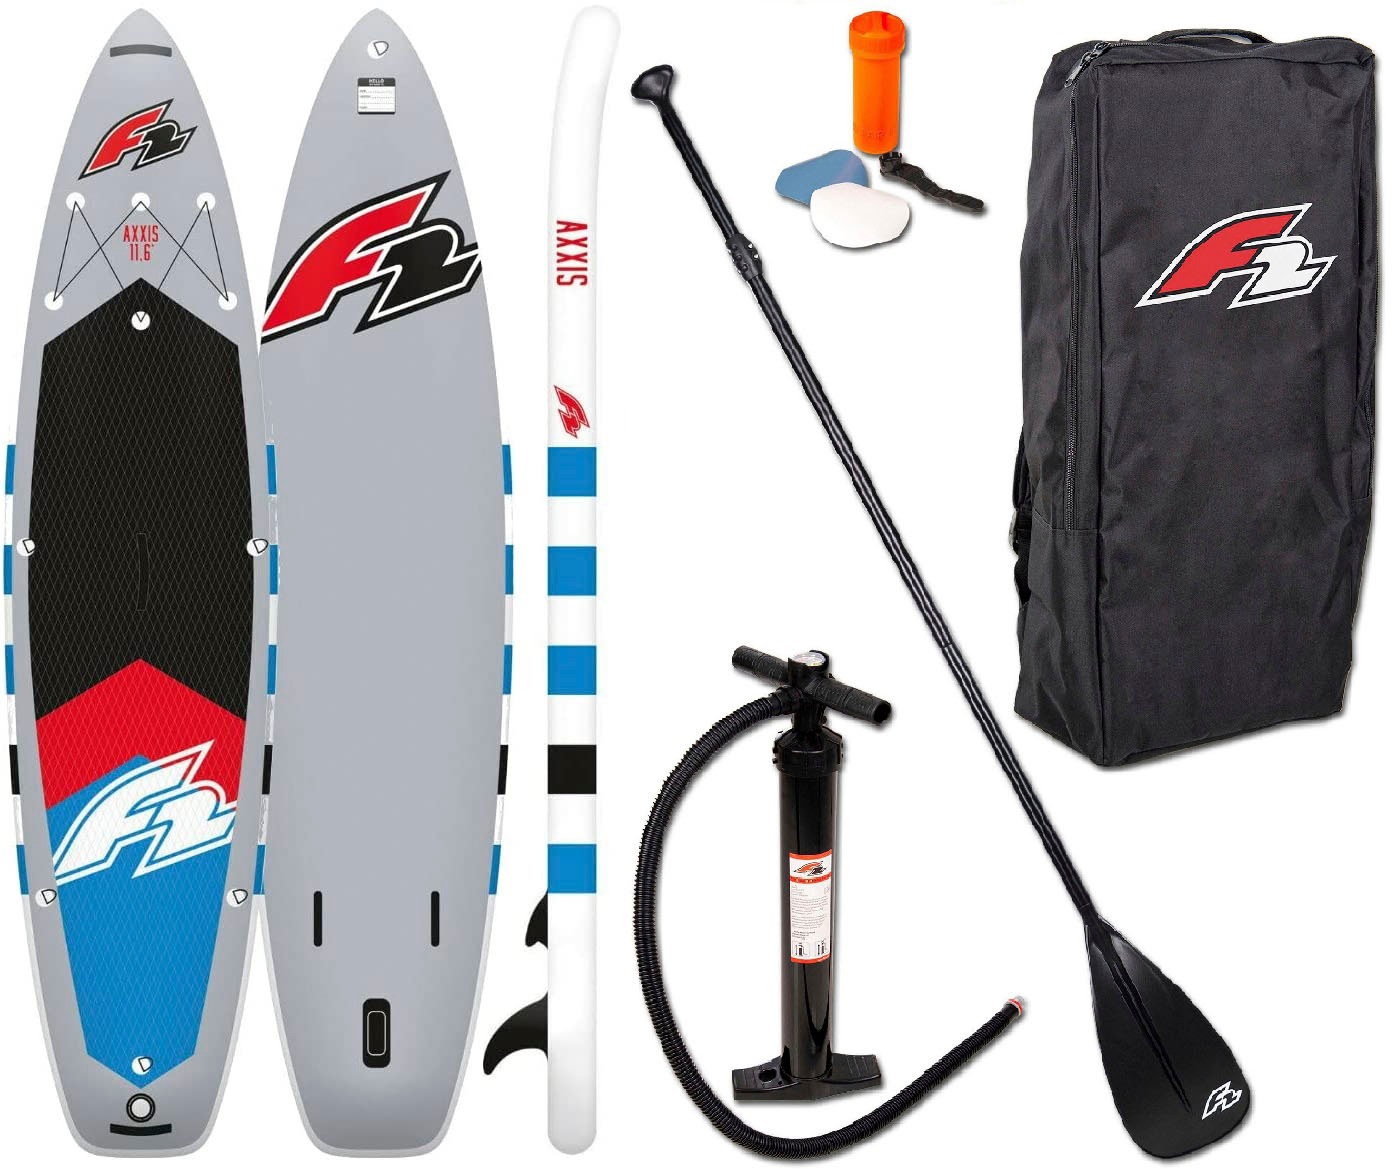 F2 5 Inflatable »Axxis grey«, (Packung, OTTO bei tlg.) SUP-Board 11,6 kaufen